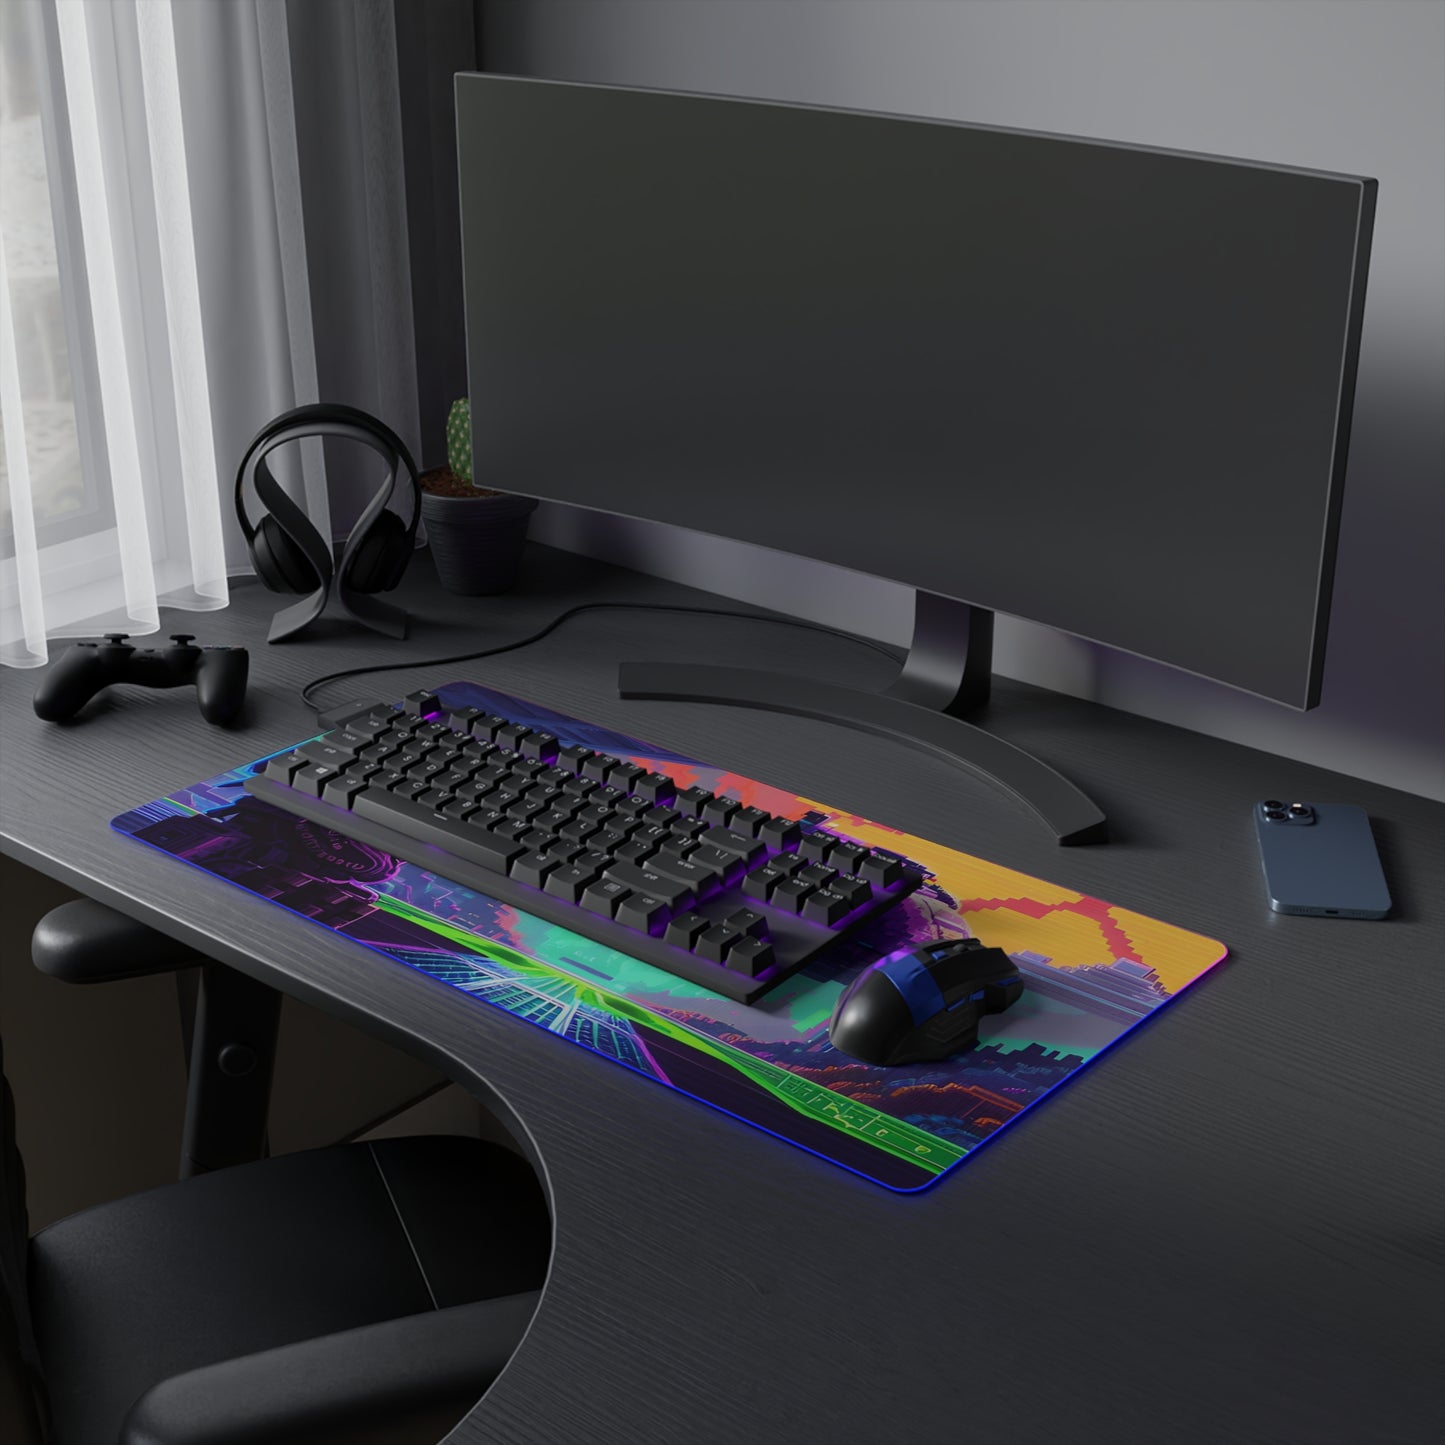 Pixel space port LED Gaming Mouse Pad